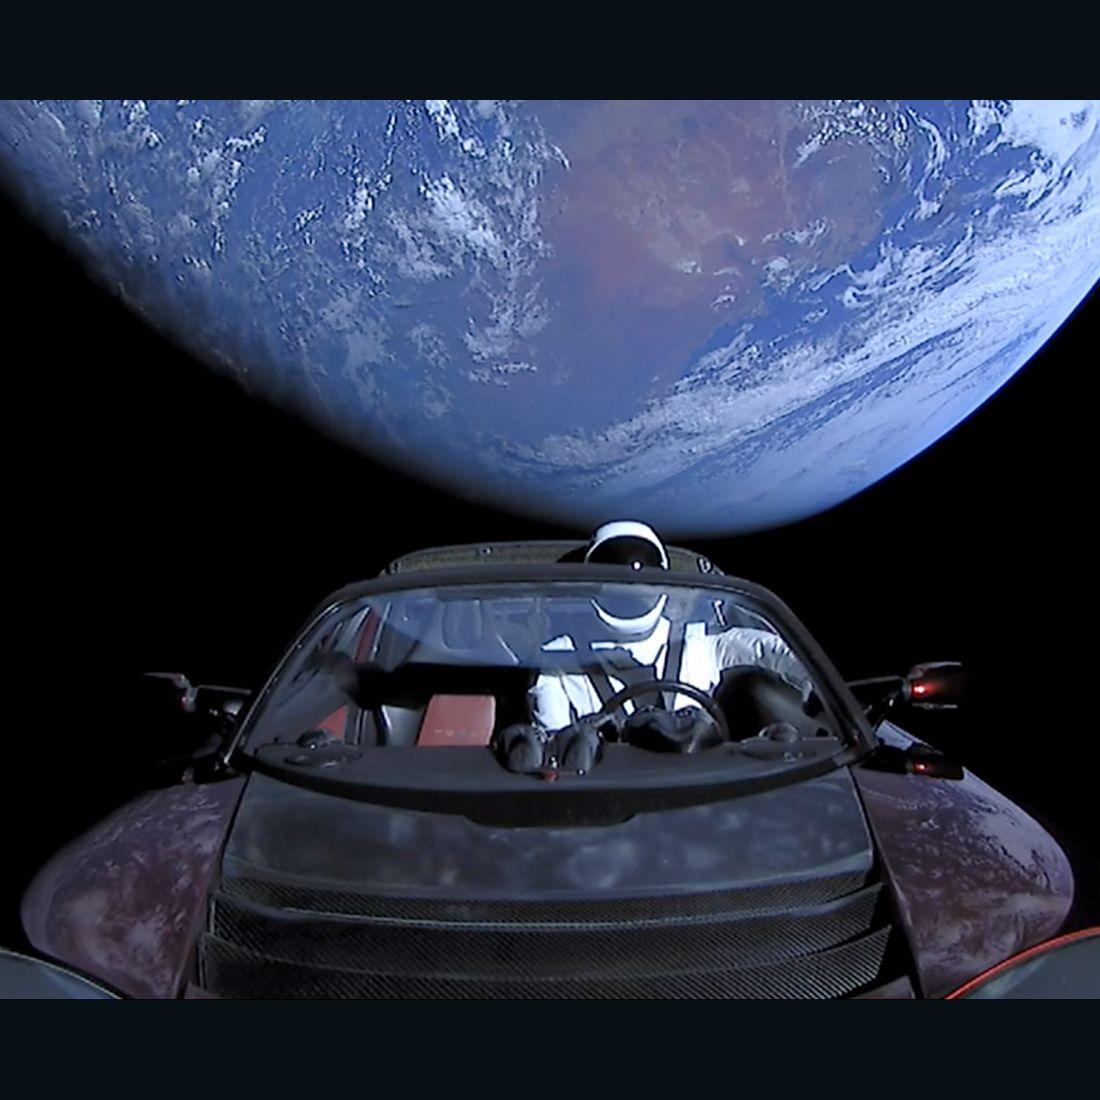 SpaceX put a Tesla sportscar into space five years ago. Where is it now? |  CNN